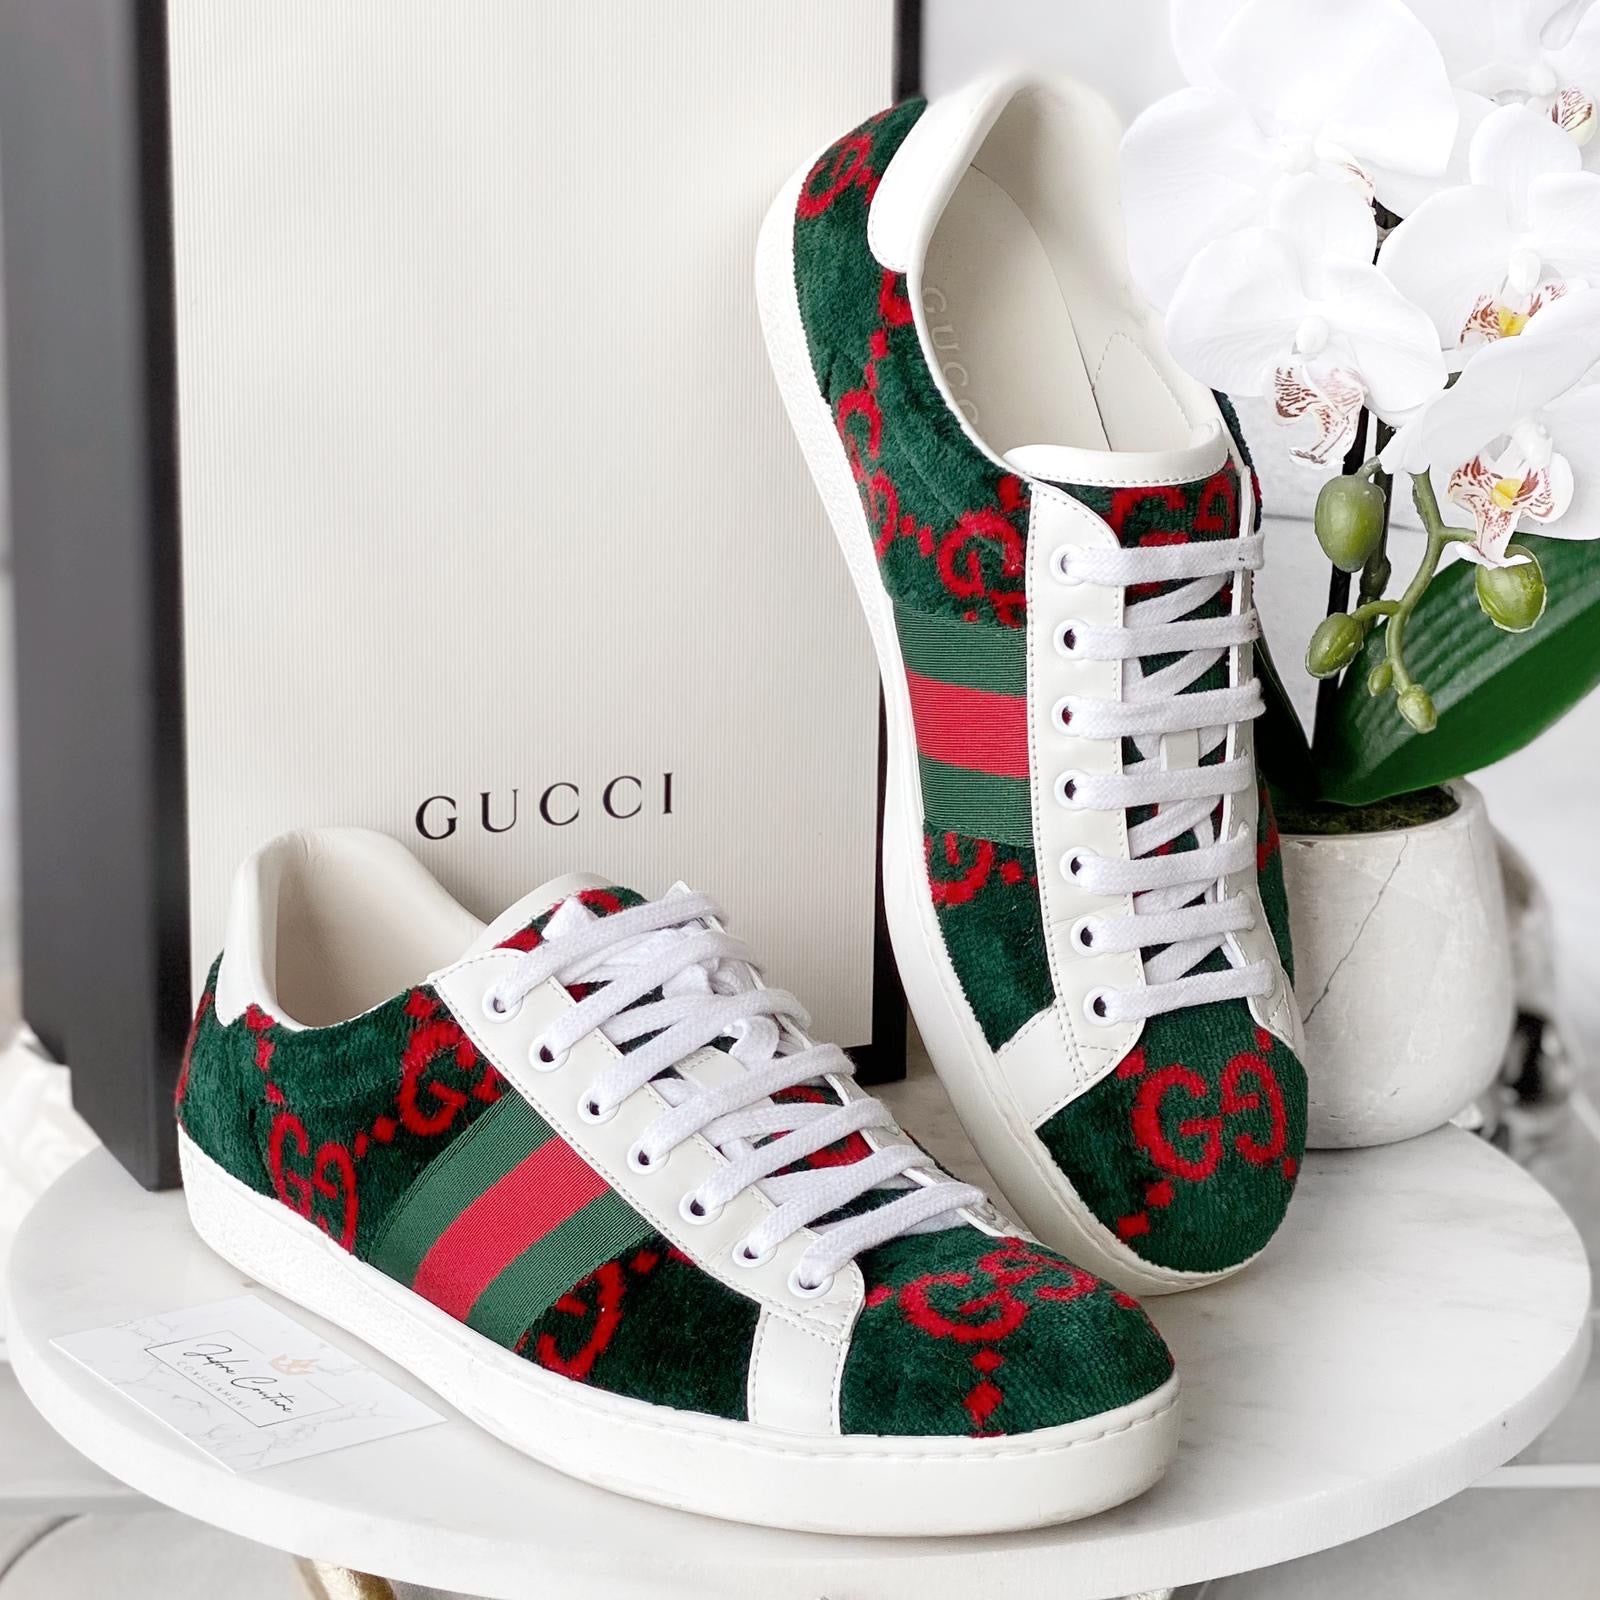 Man with Green and Black Gucci Sneakers with Purple Gems Decoration before  Boss Fashion Show, Editorial Photo - Image of accessory, stylish: 194199531